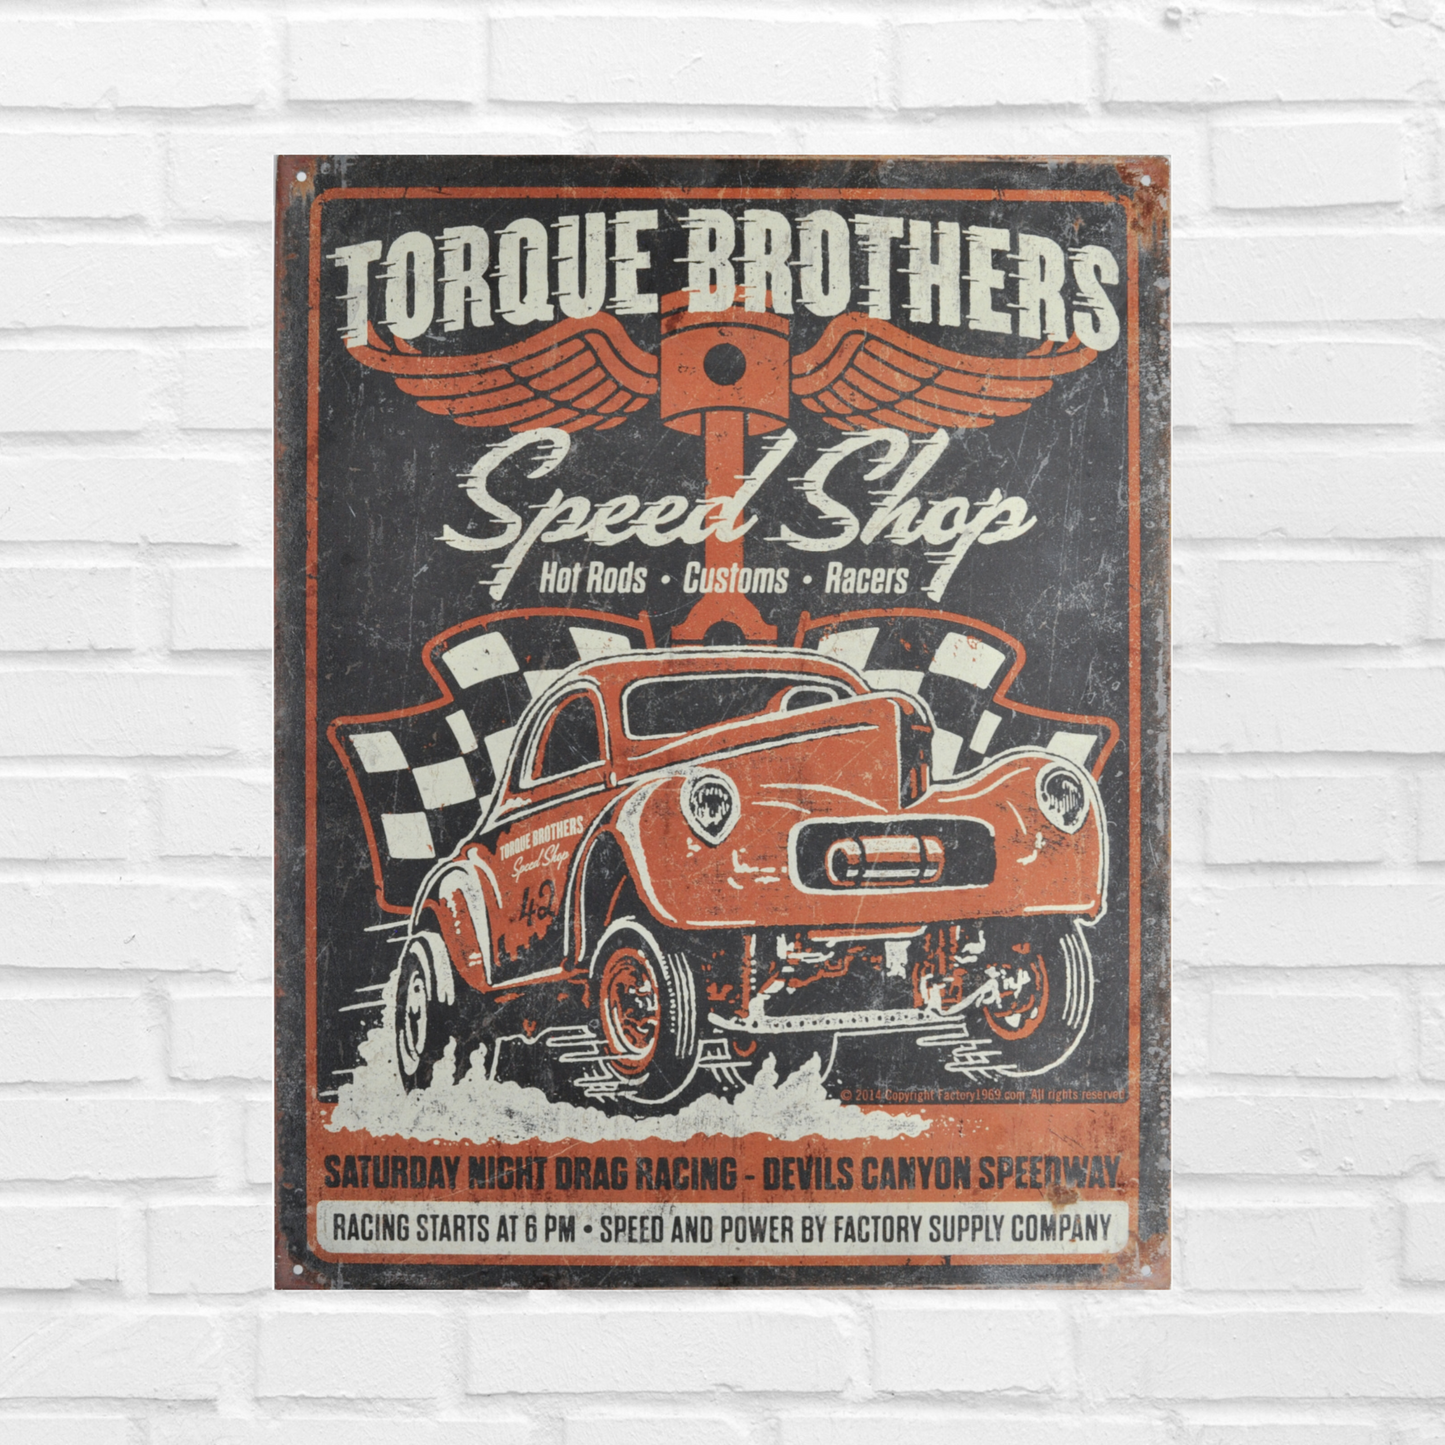 Vintage Poster Print that says "Torque Brothers Speed Shop" and a classic car in front in orange with a distressed design.